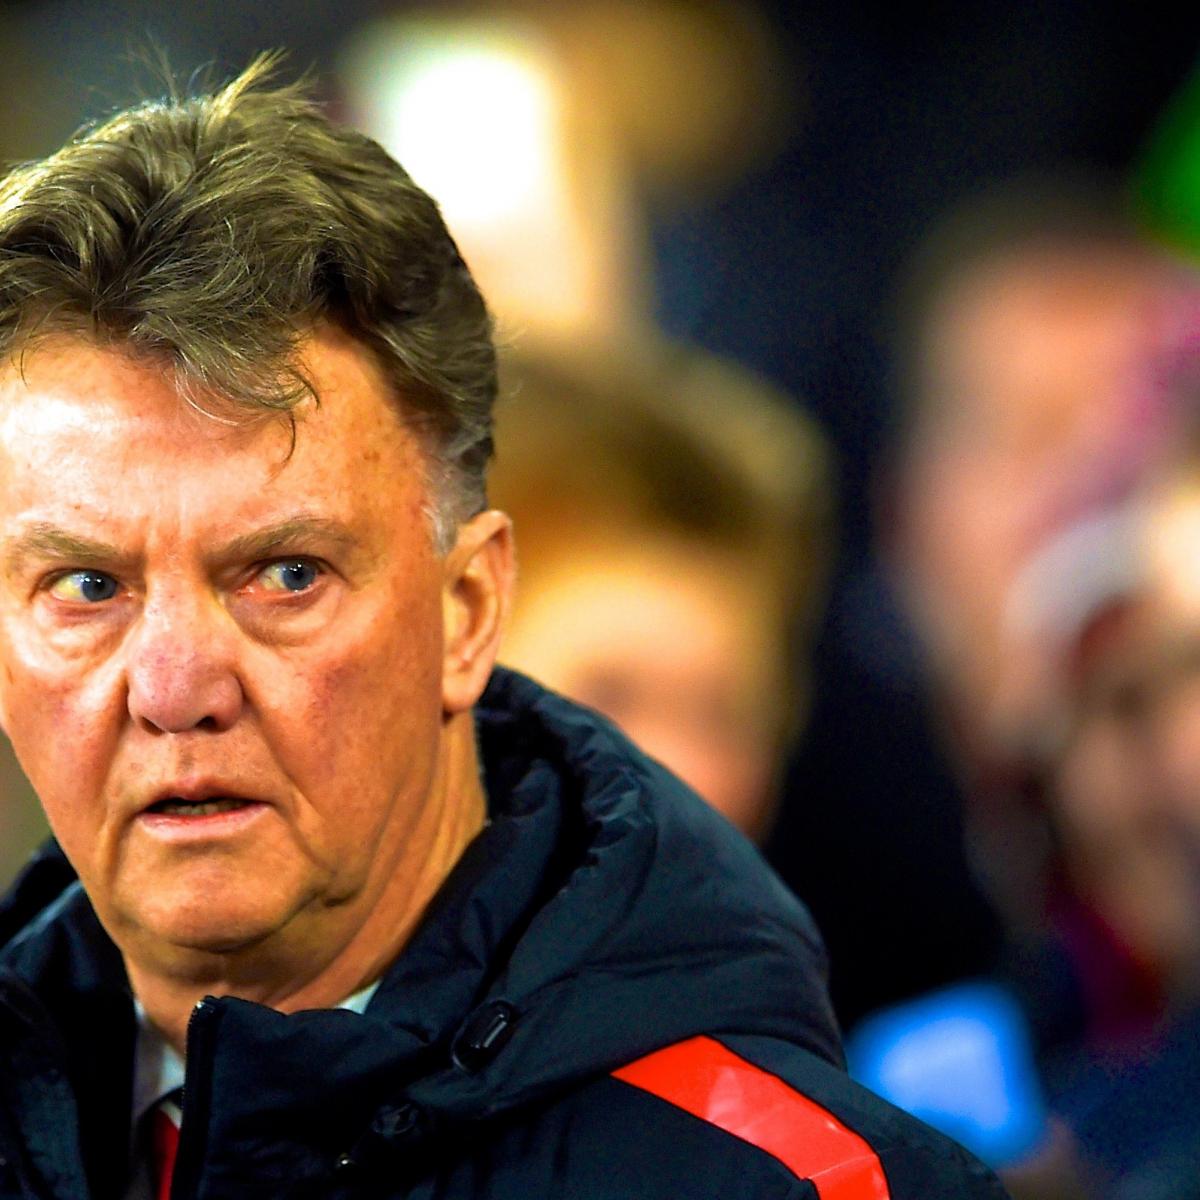 Louis Van Gaal Must Ditch His 3-5-2 Formation at Manchester United